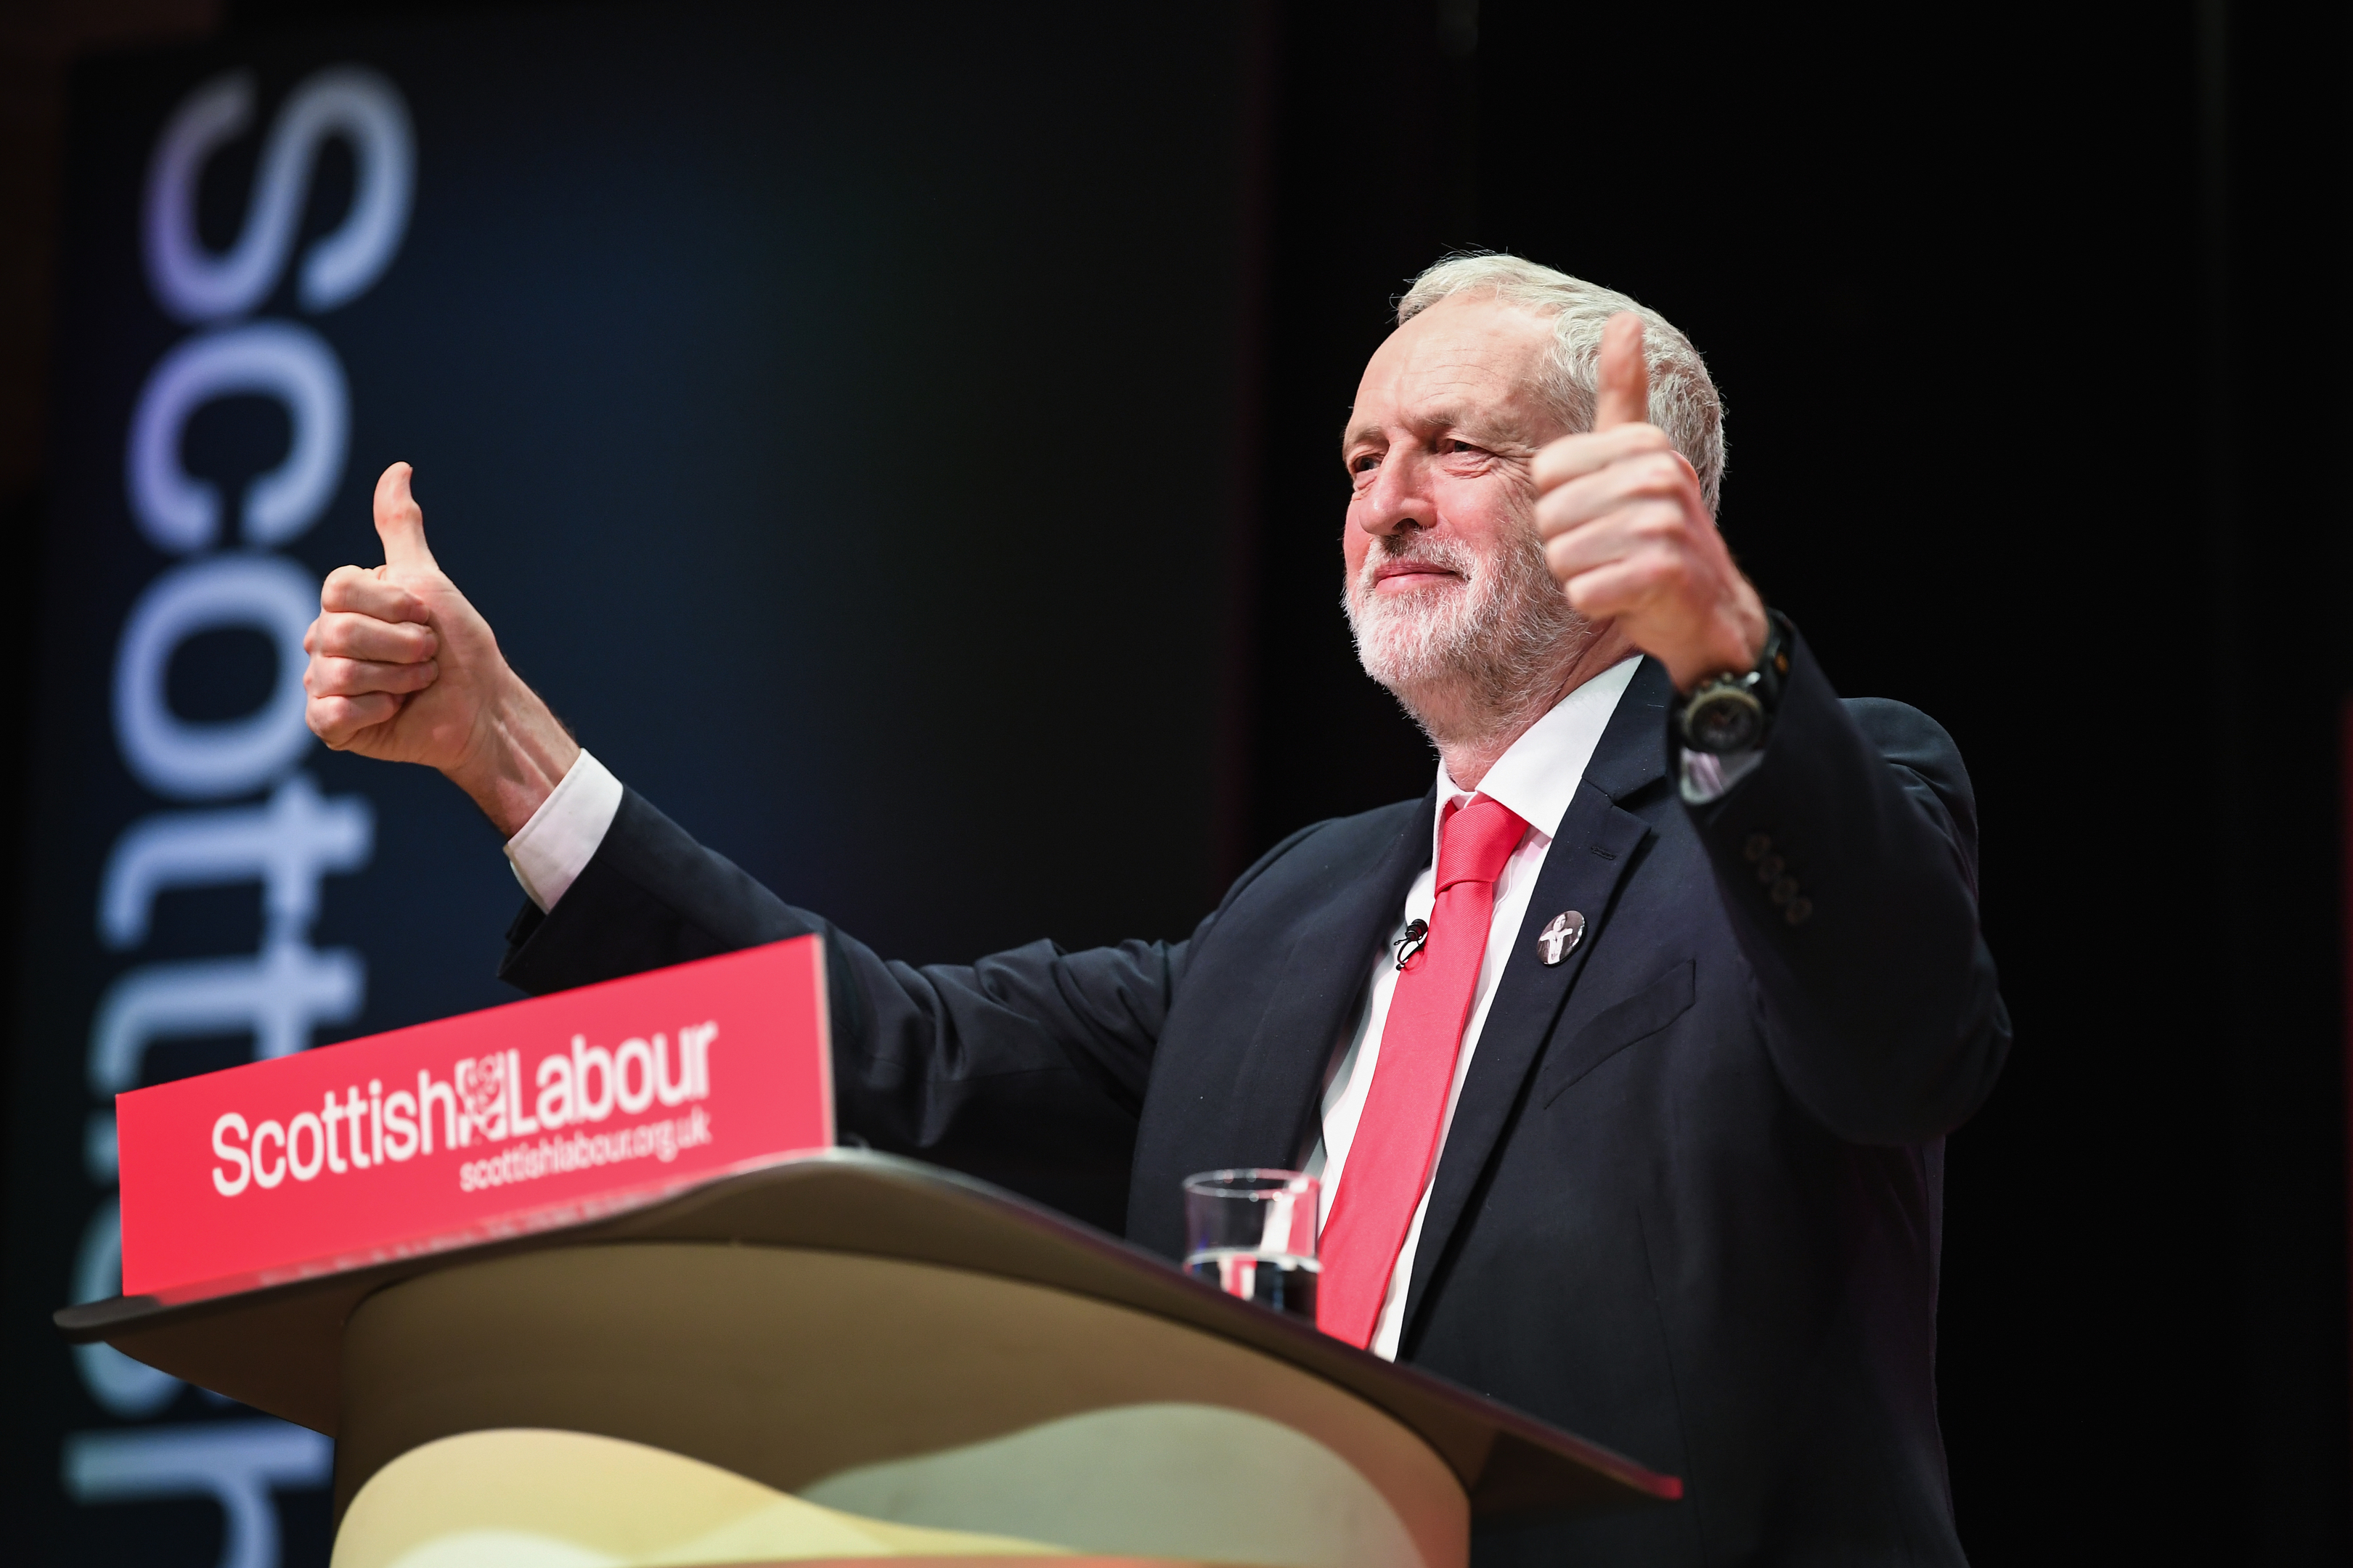 Labour leader Jeremy Corbyn acknowledges delegates' applause before giving his keynote speech to the Scottish Labour Party Conference at the Caird Hall on March 9 2018 in Dundee.